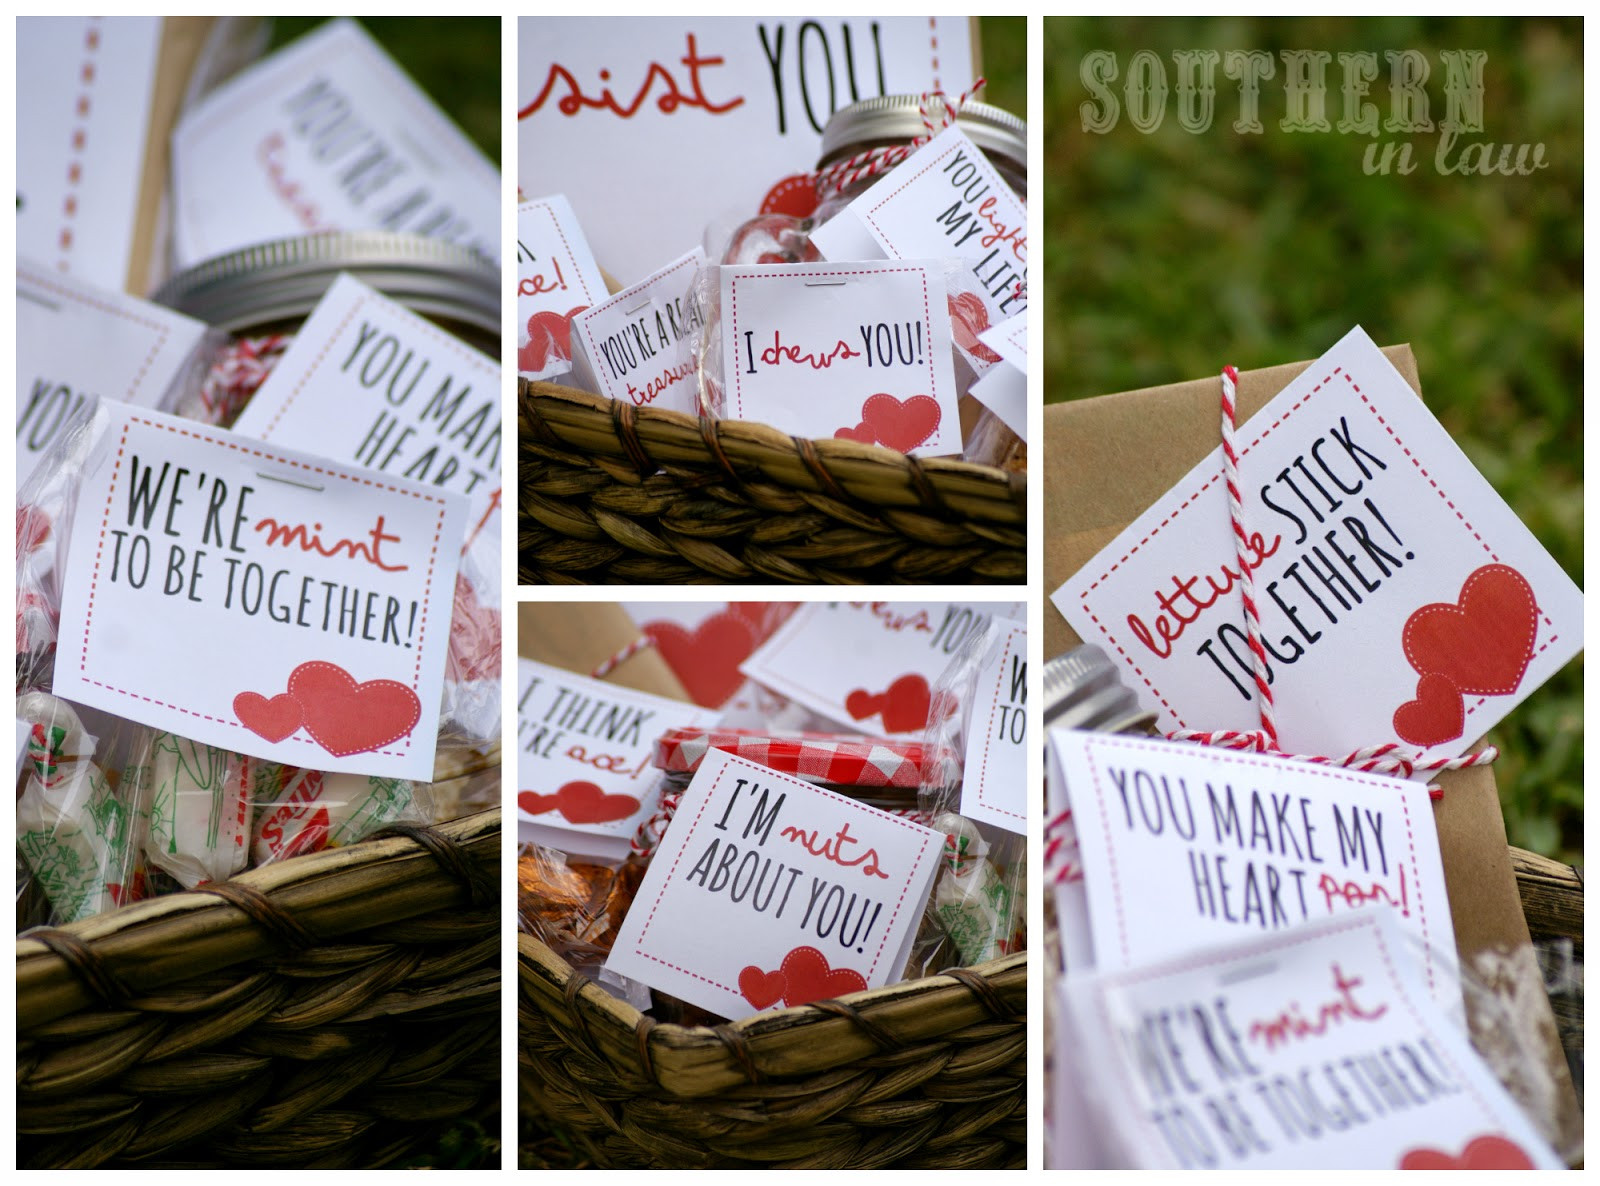 Be My Valentine Gift Ideas
 Southern In Law My Punny Valentine 40 Punny Valentines